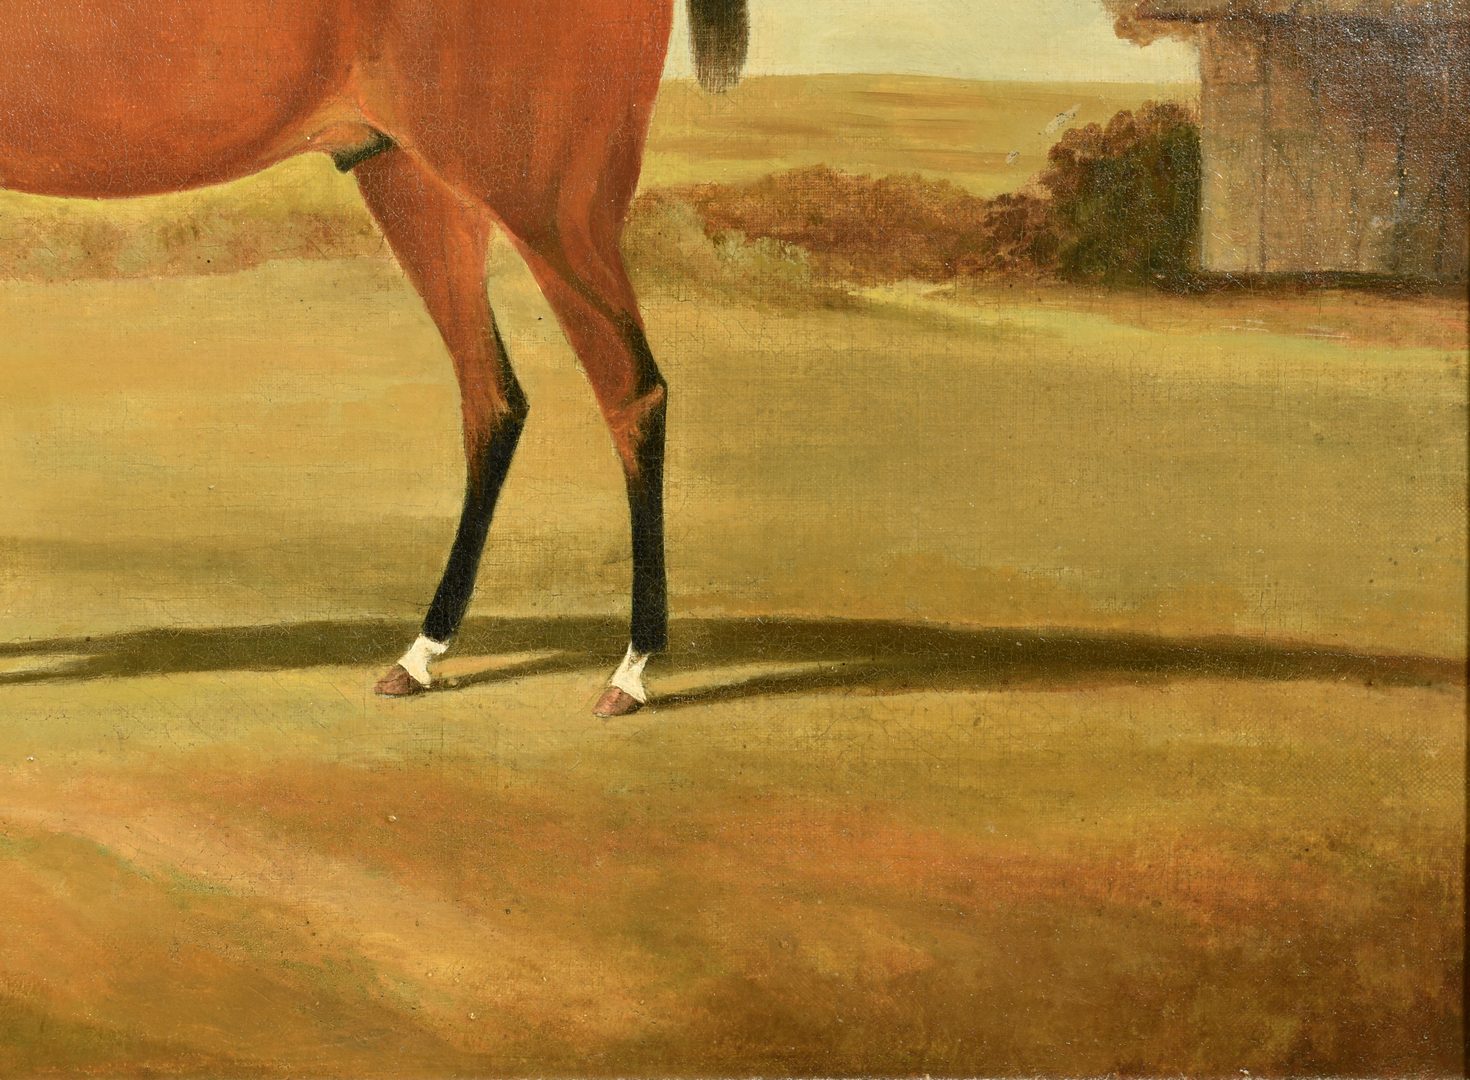 Lot 525: Attr. Harry Hall, large portrait of horse